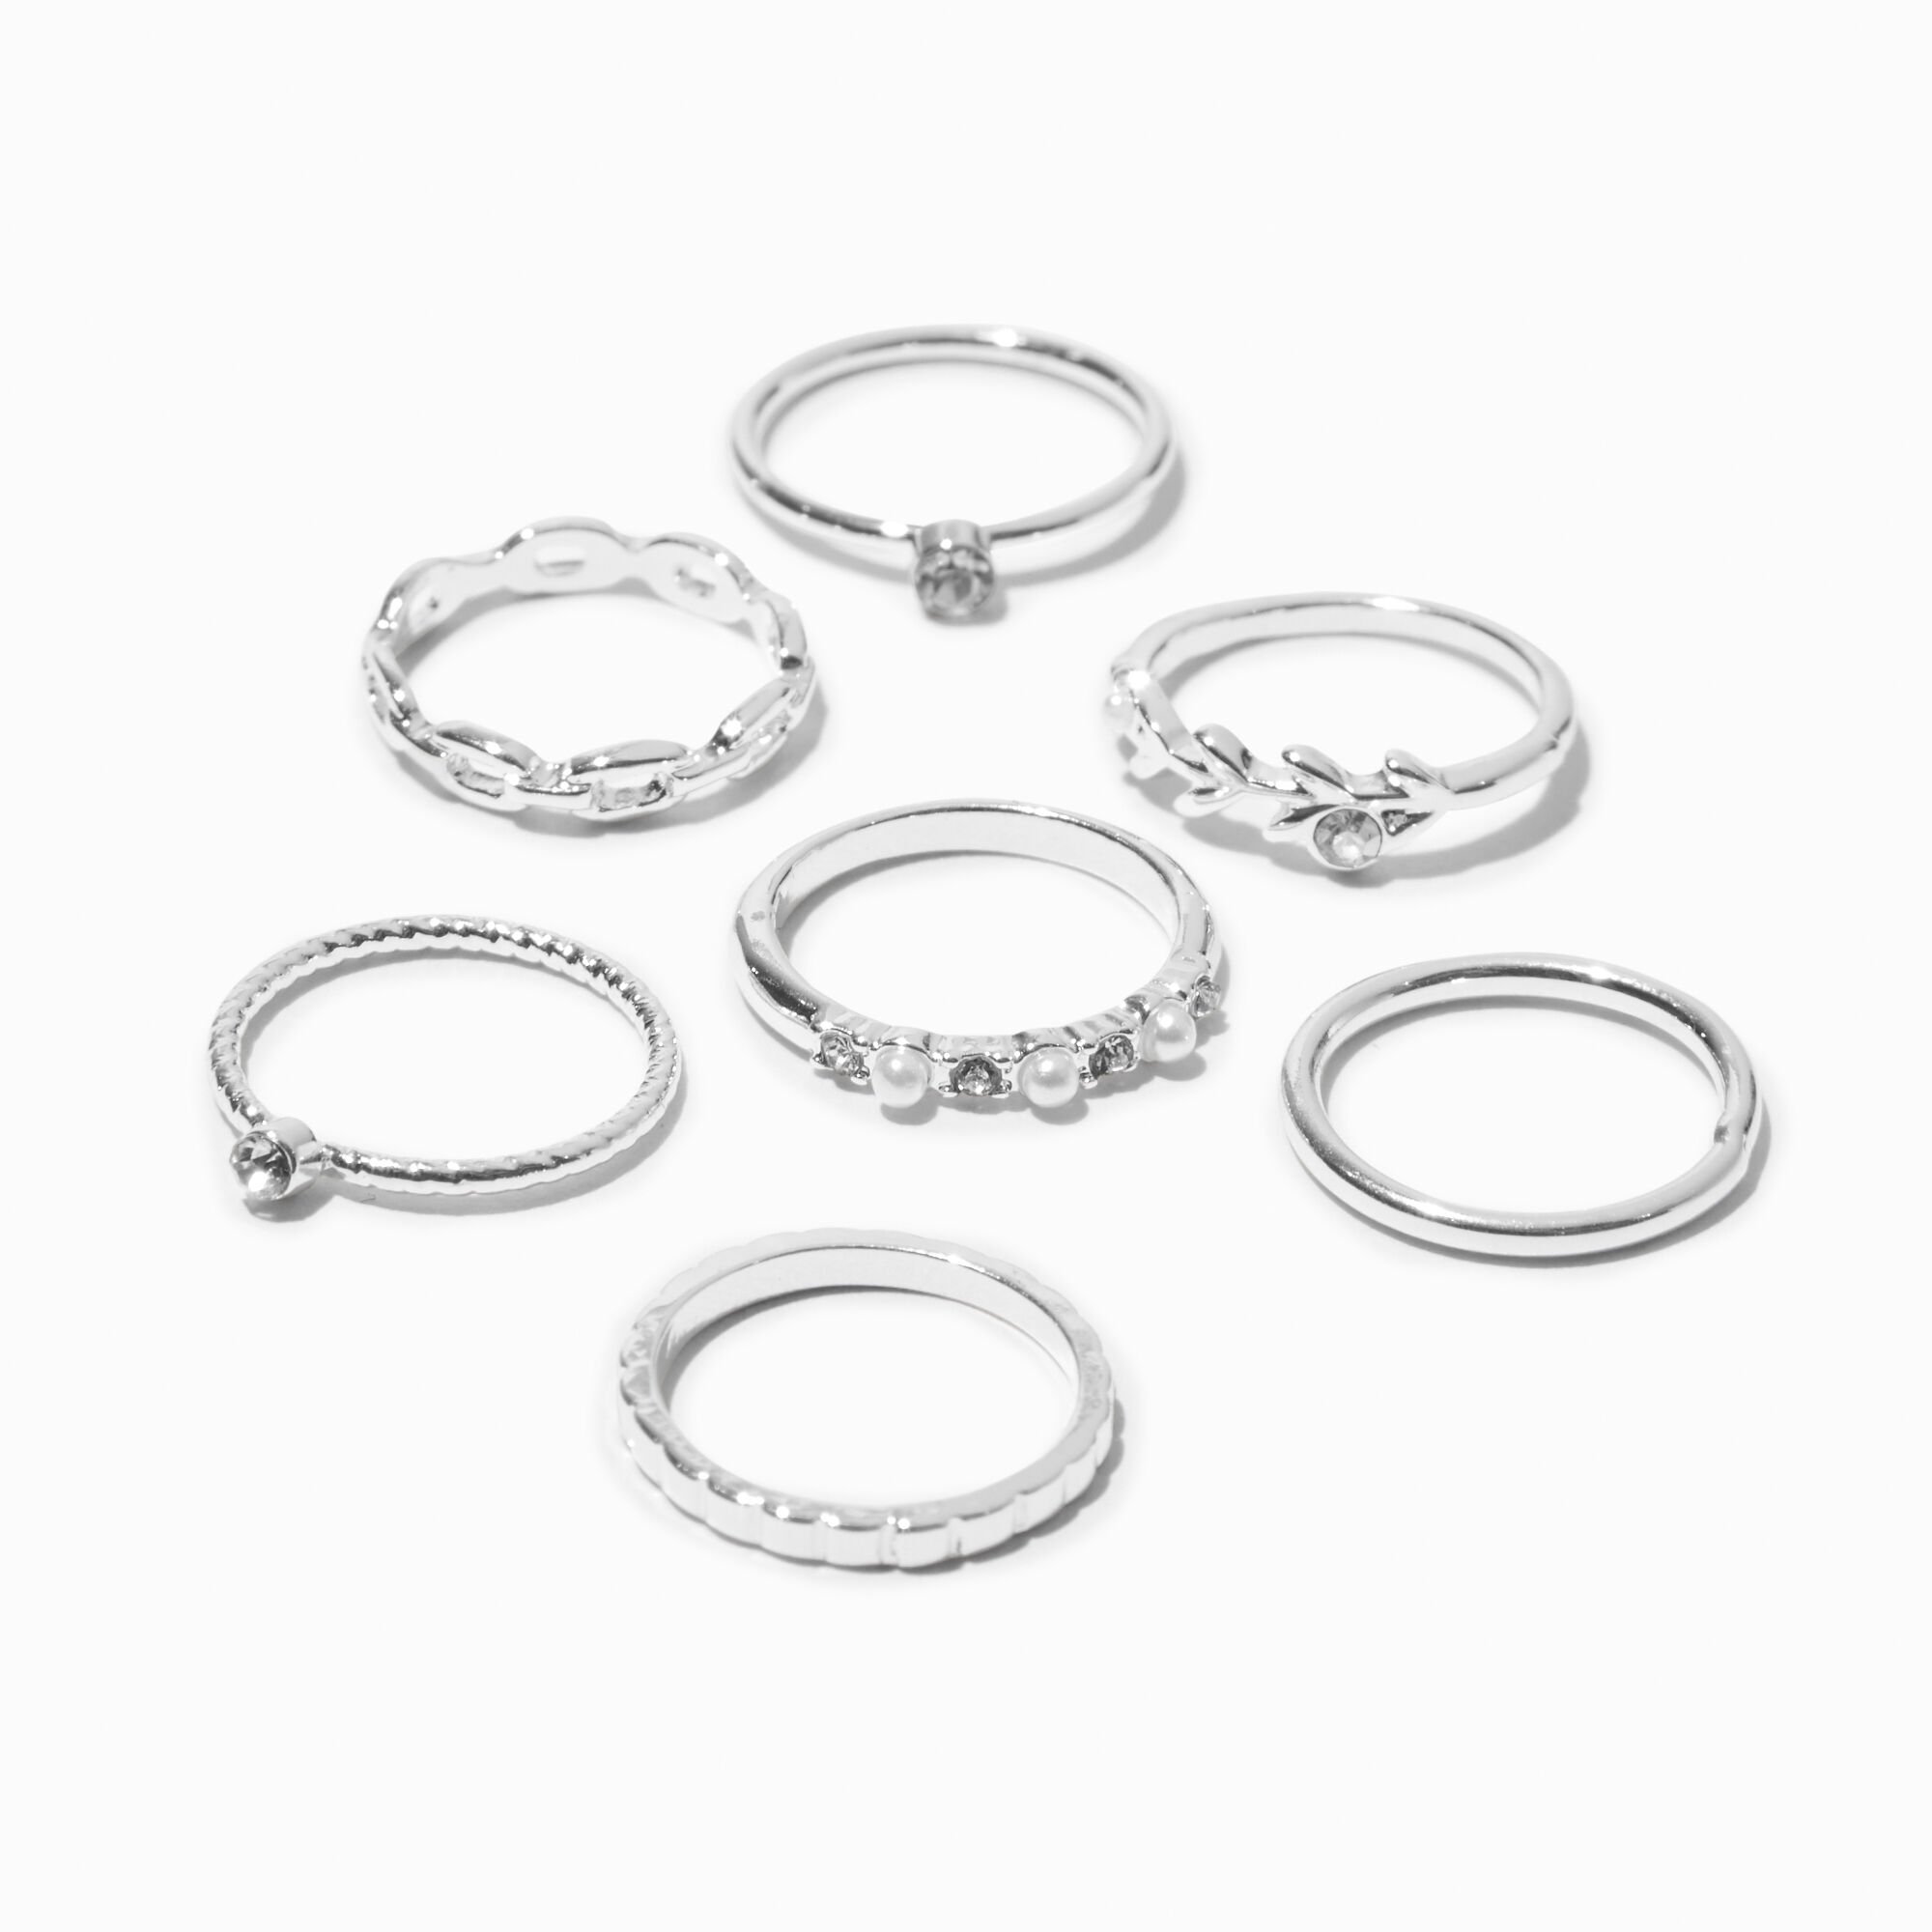 View Claires Tone Pearl Crystal Midi Rings 7 Pack Silver information